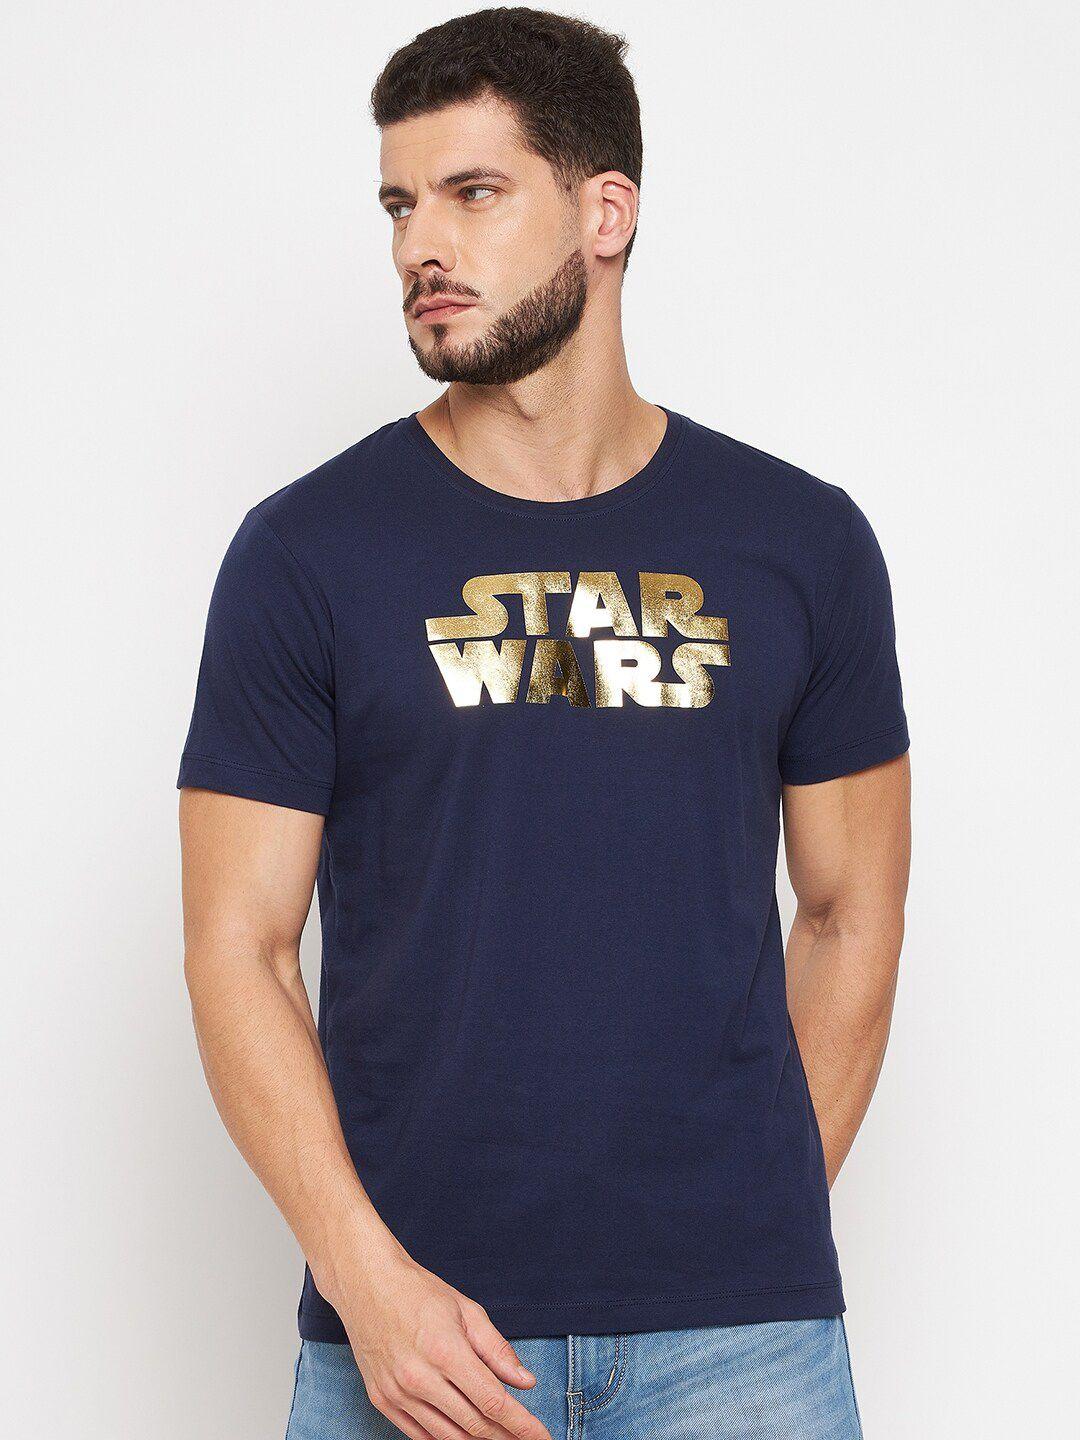 star-wars-by-wear-your-mind-typography-printed-pure-cotton-t-shirt